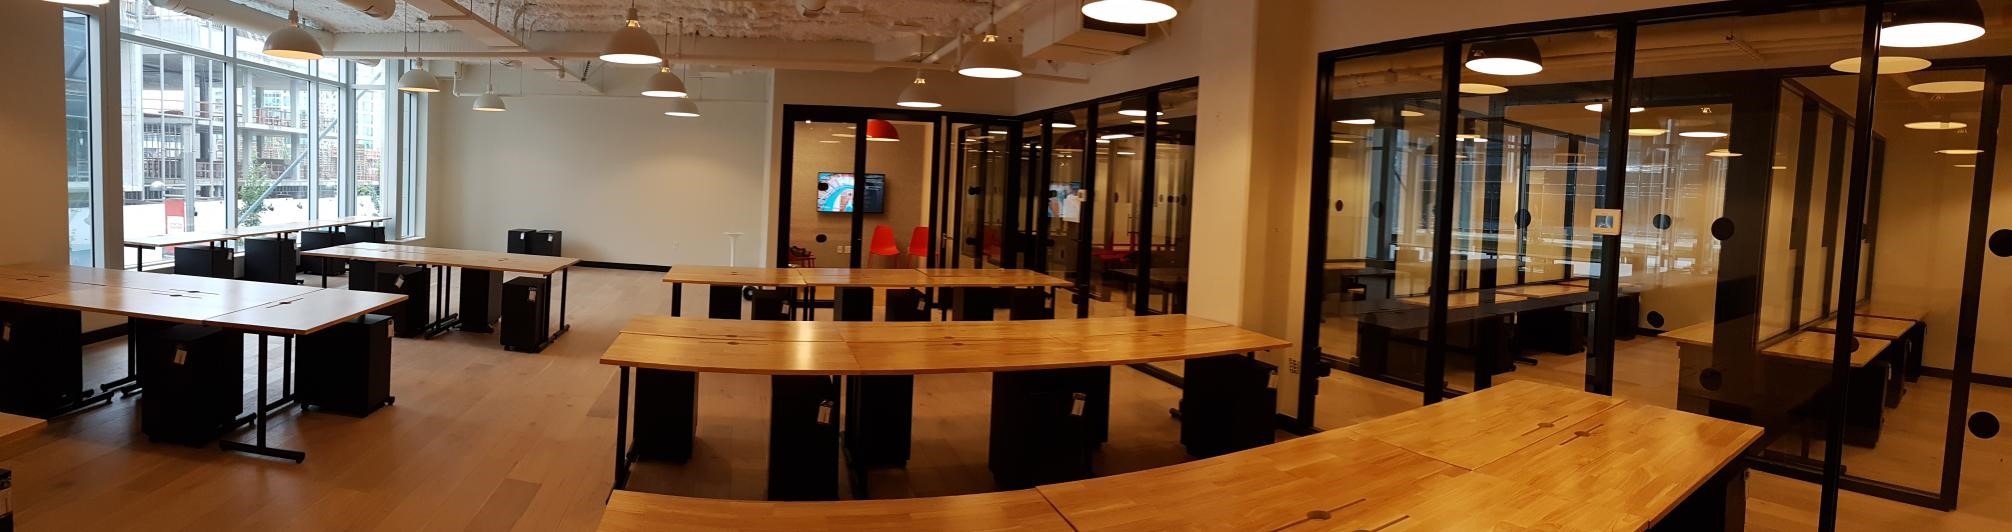 Pic-3 WEWORK STATION SQUARE